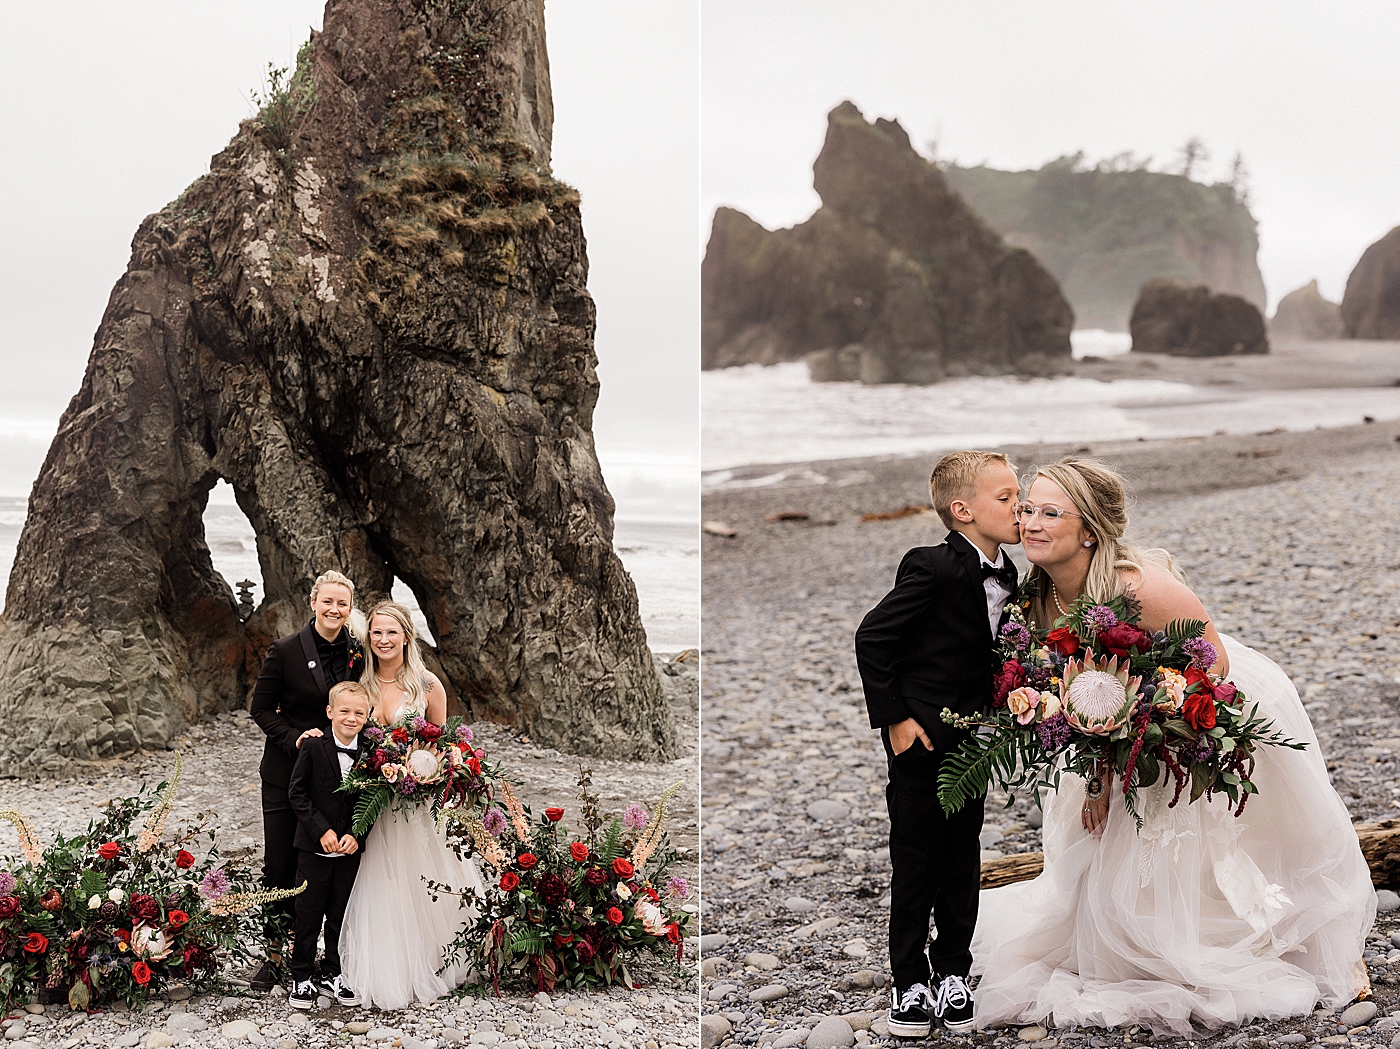 Family photos after intimate elopement at Ruby Beach. Photo by Megan Montalvo Photography.